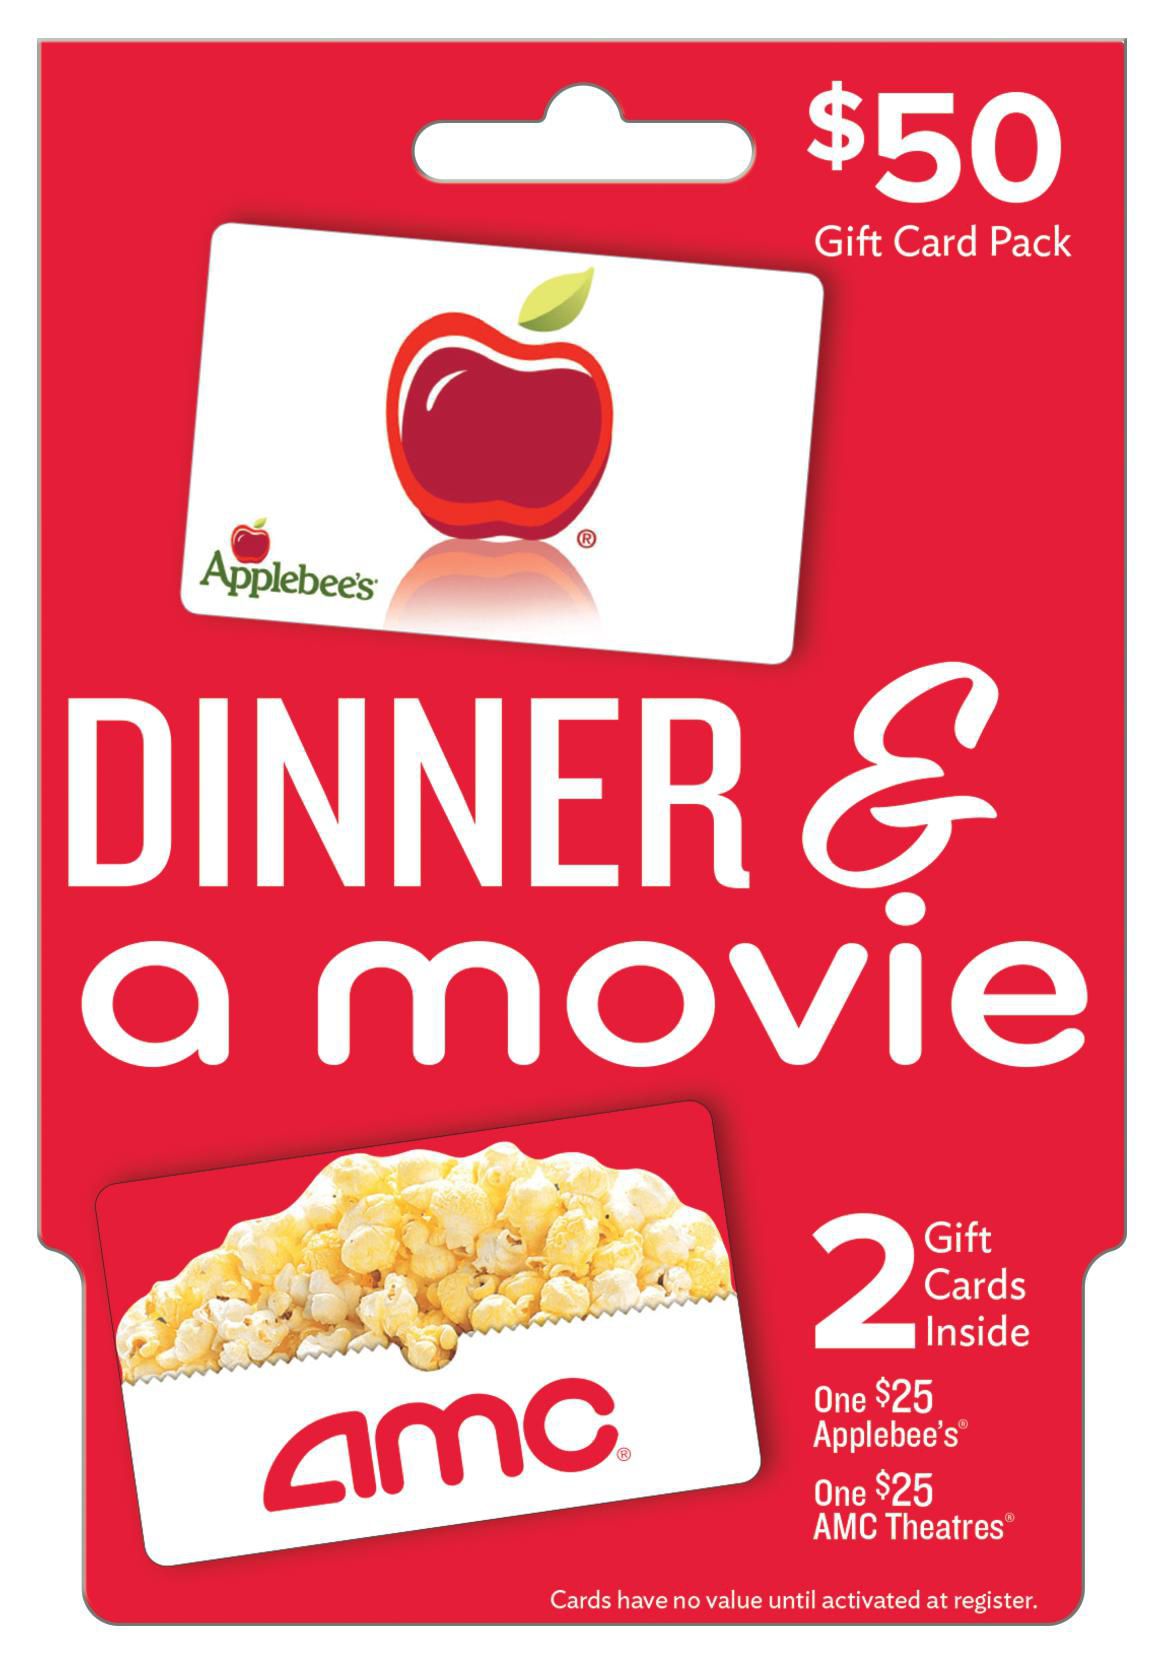 $50 Dinner and a Movie Gift Card Pack